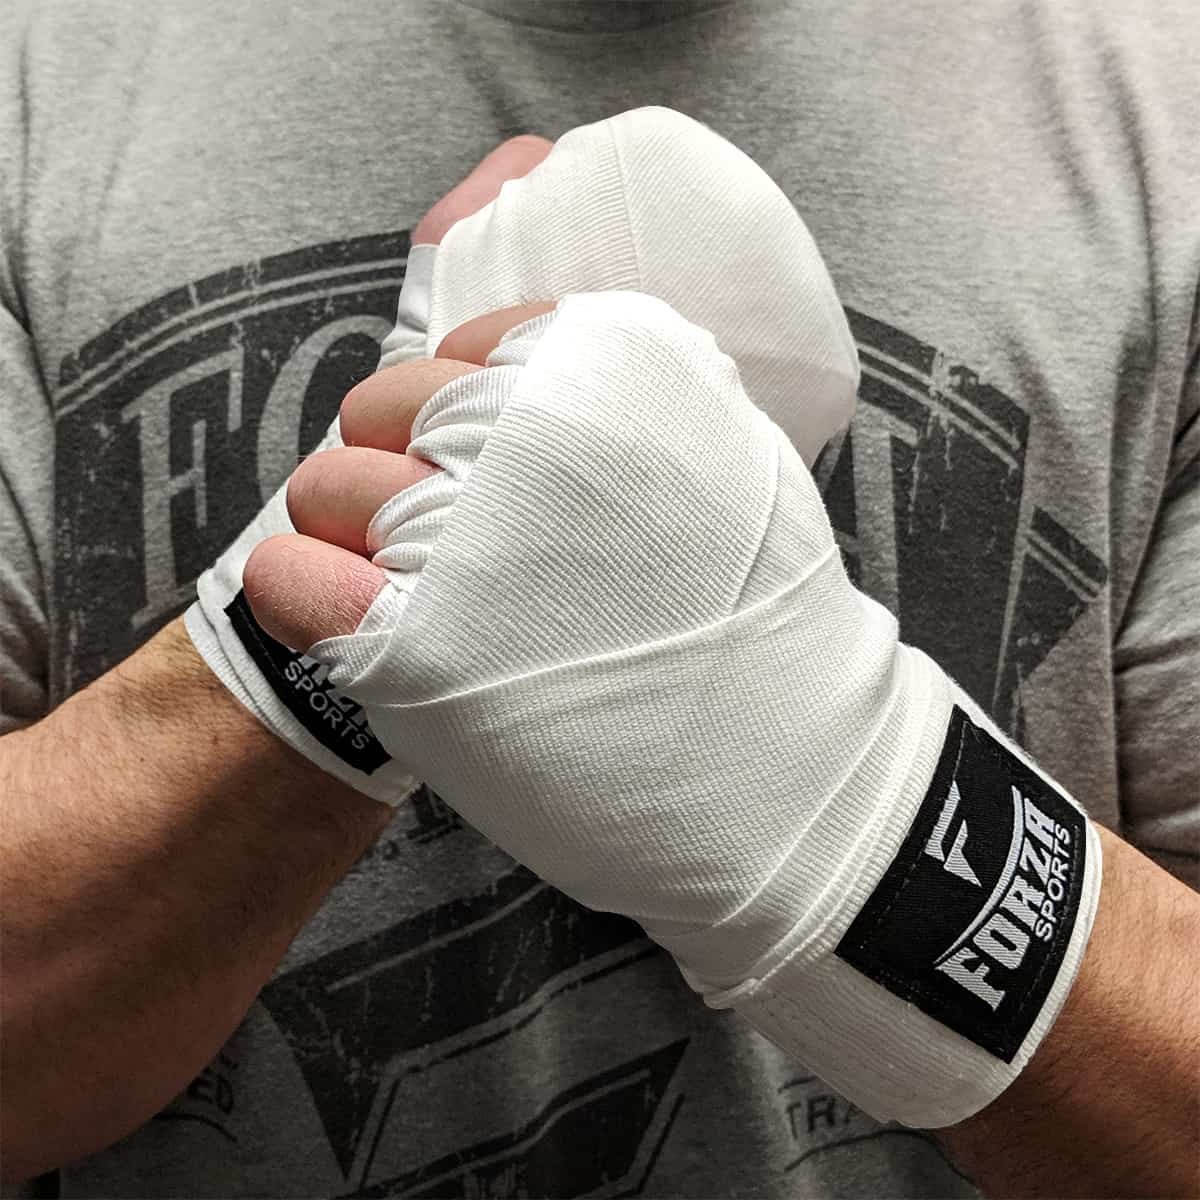 -High Quality Hand Wraps for MMA Boxing and other combat sports. Hand Wraps 